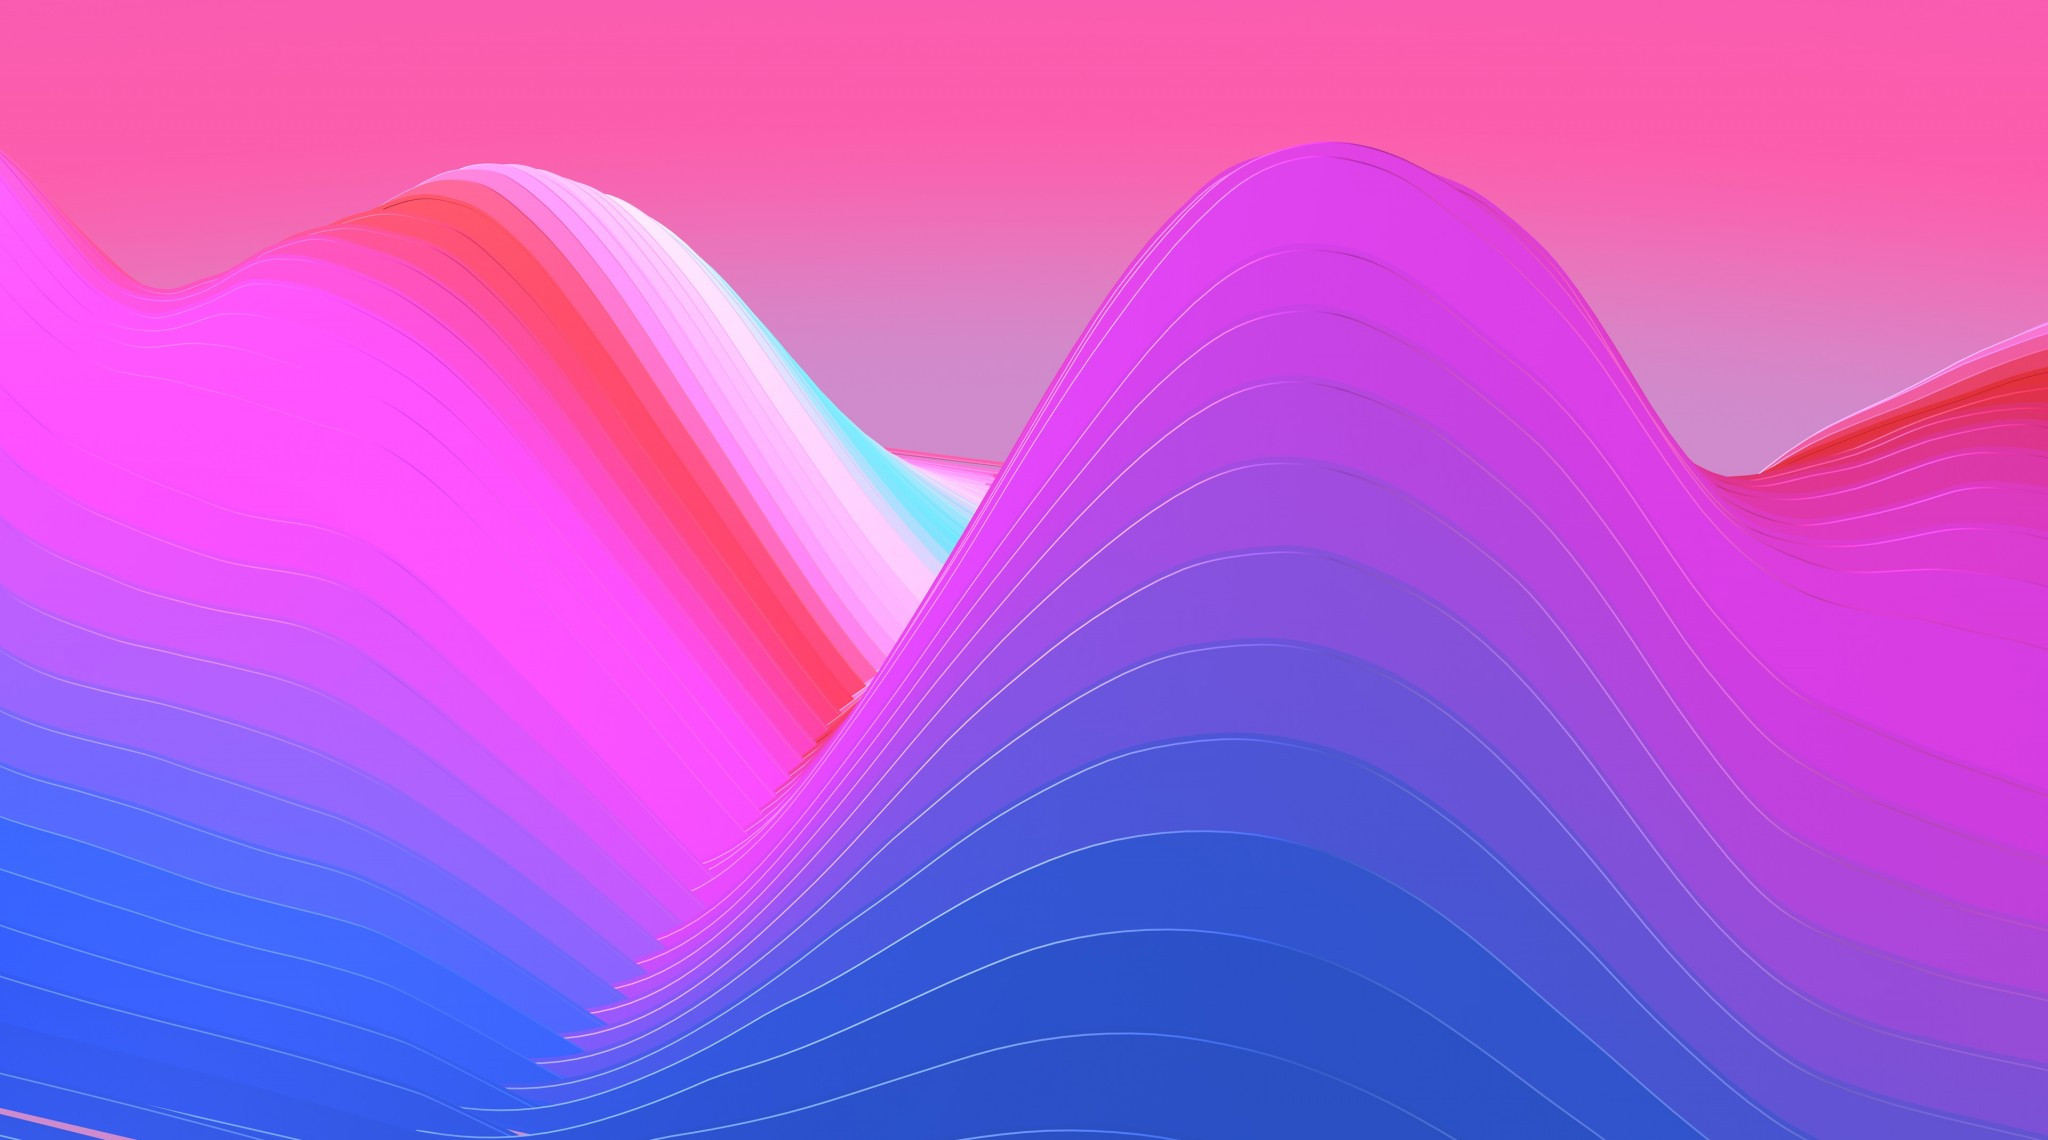 Download 2048x1140 Neon Waves, Pink And Purple, Mountain Wallpaper